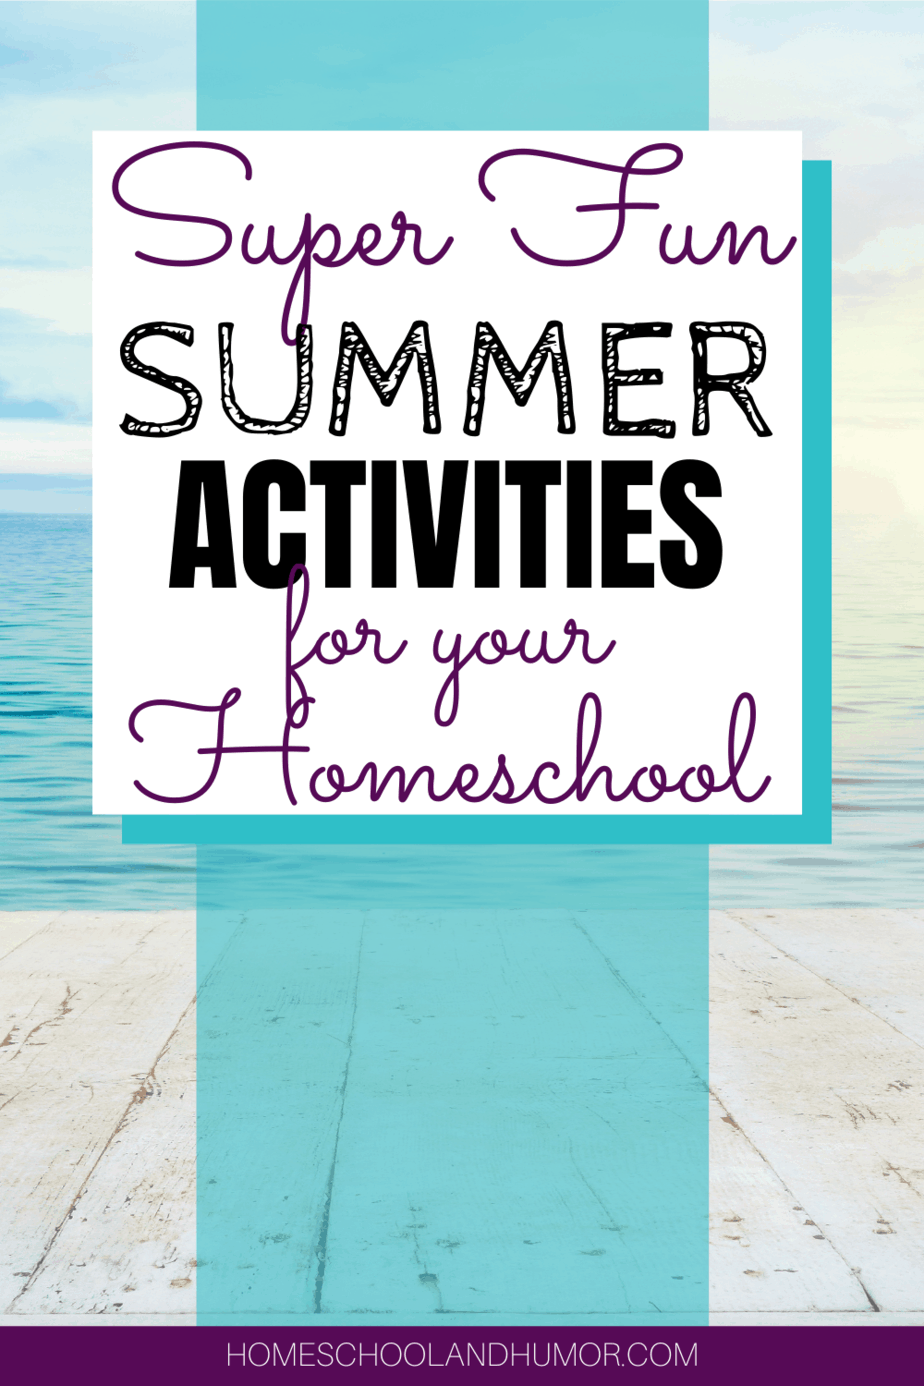 Keep Busy With These Fun Summer Activities for Teens and Kids in 2021